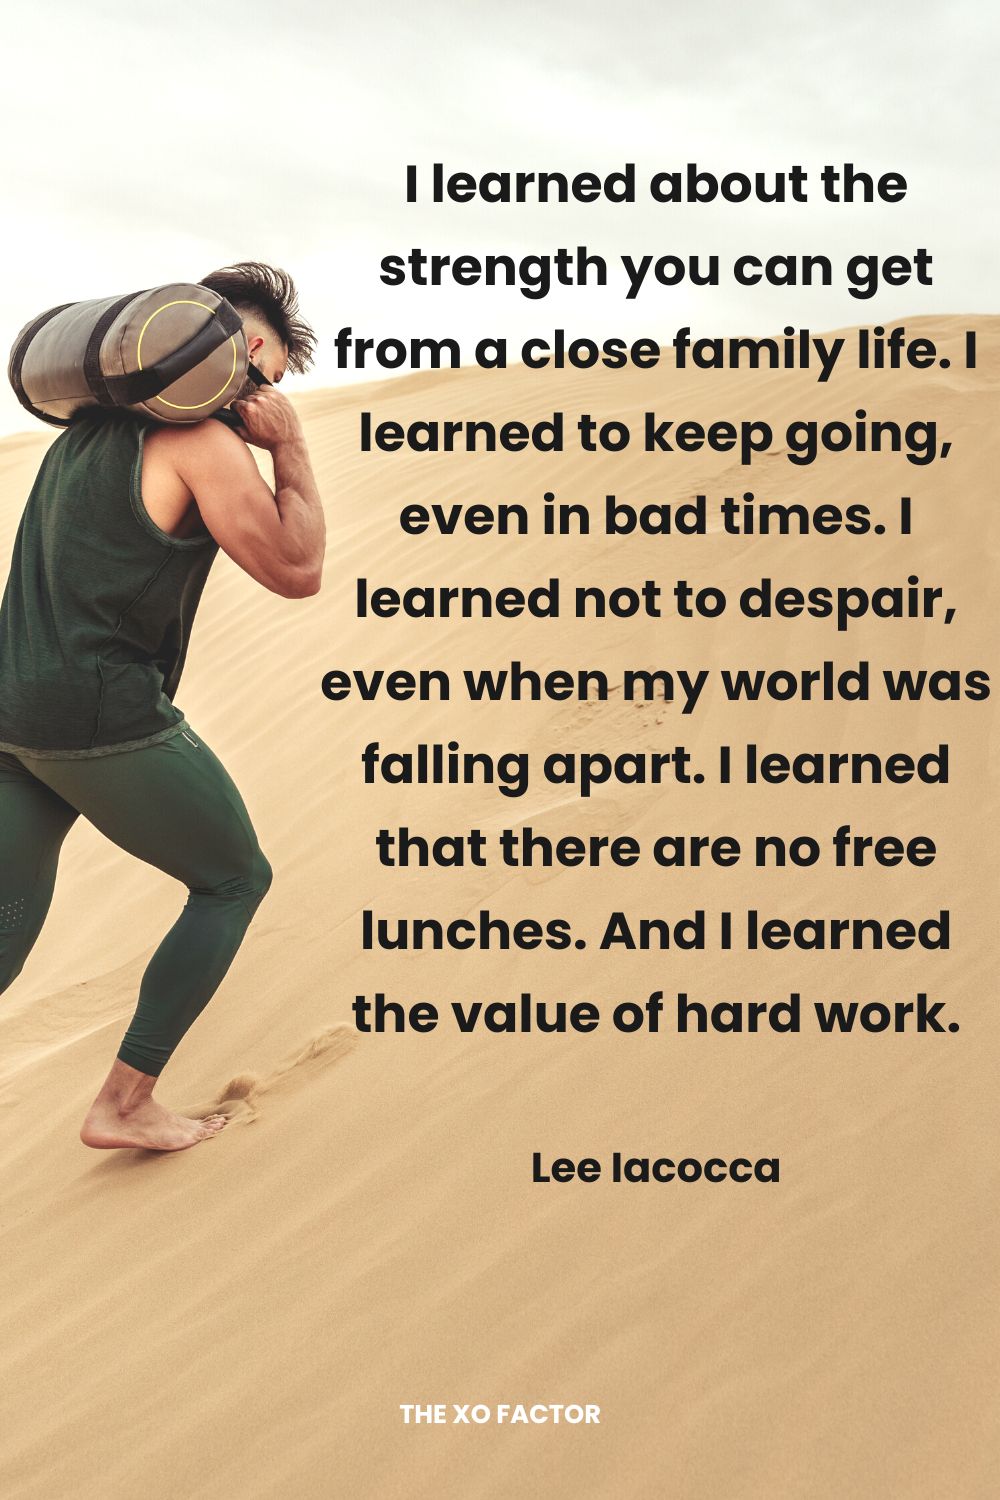 I learned about the strength you can get from a close family life. I learned to keep going, even in bad times. I learned not to despair, even when my world was falling apart. I learned that there are no free lunches. And I learned the value of hard work. Lee Iacocca